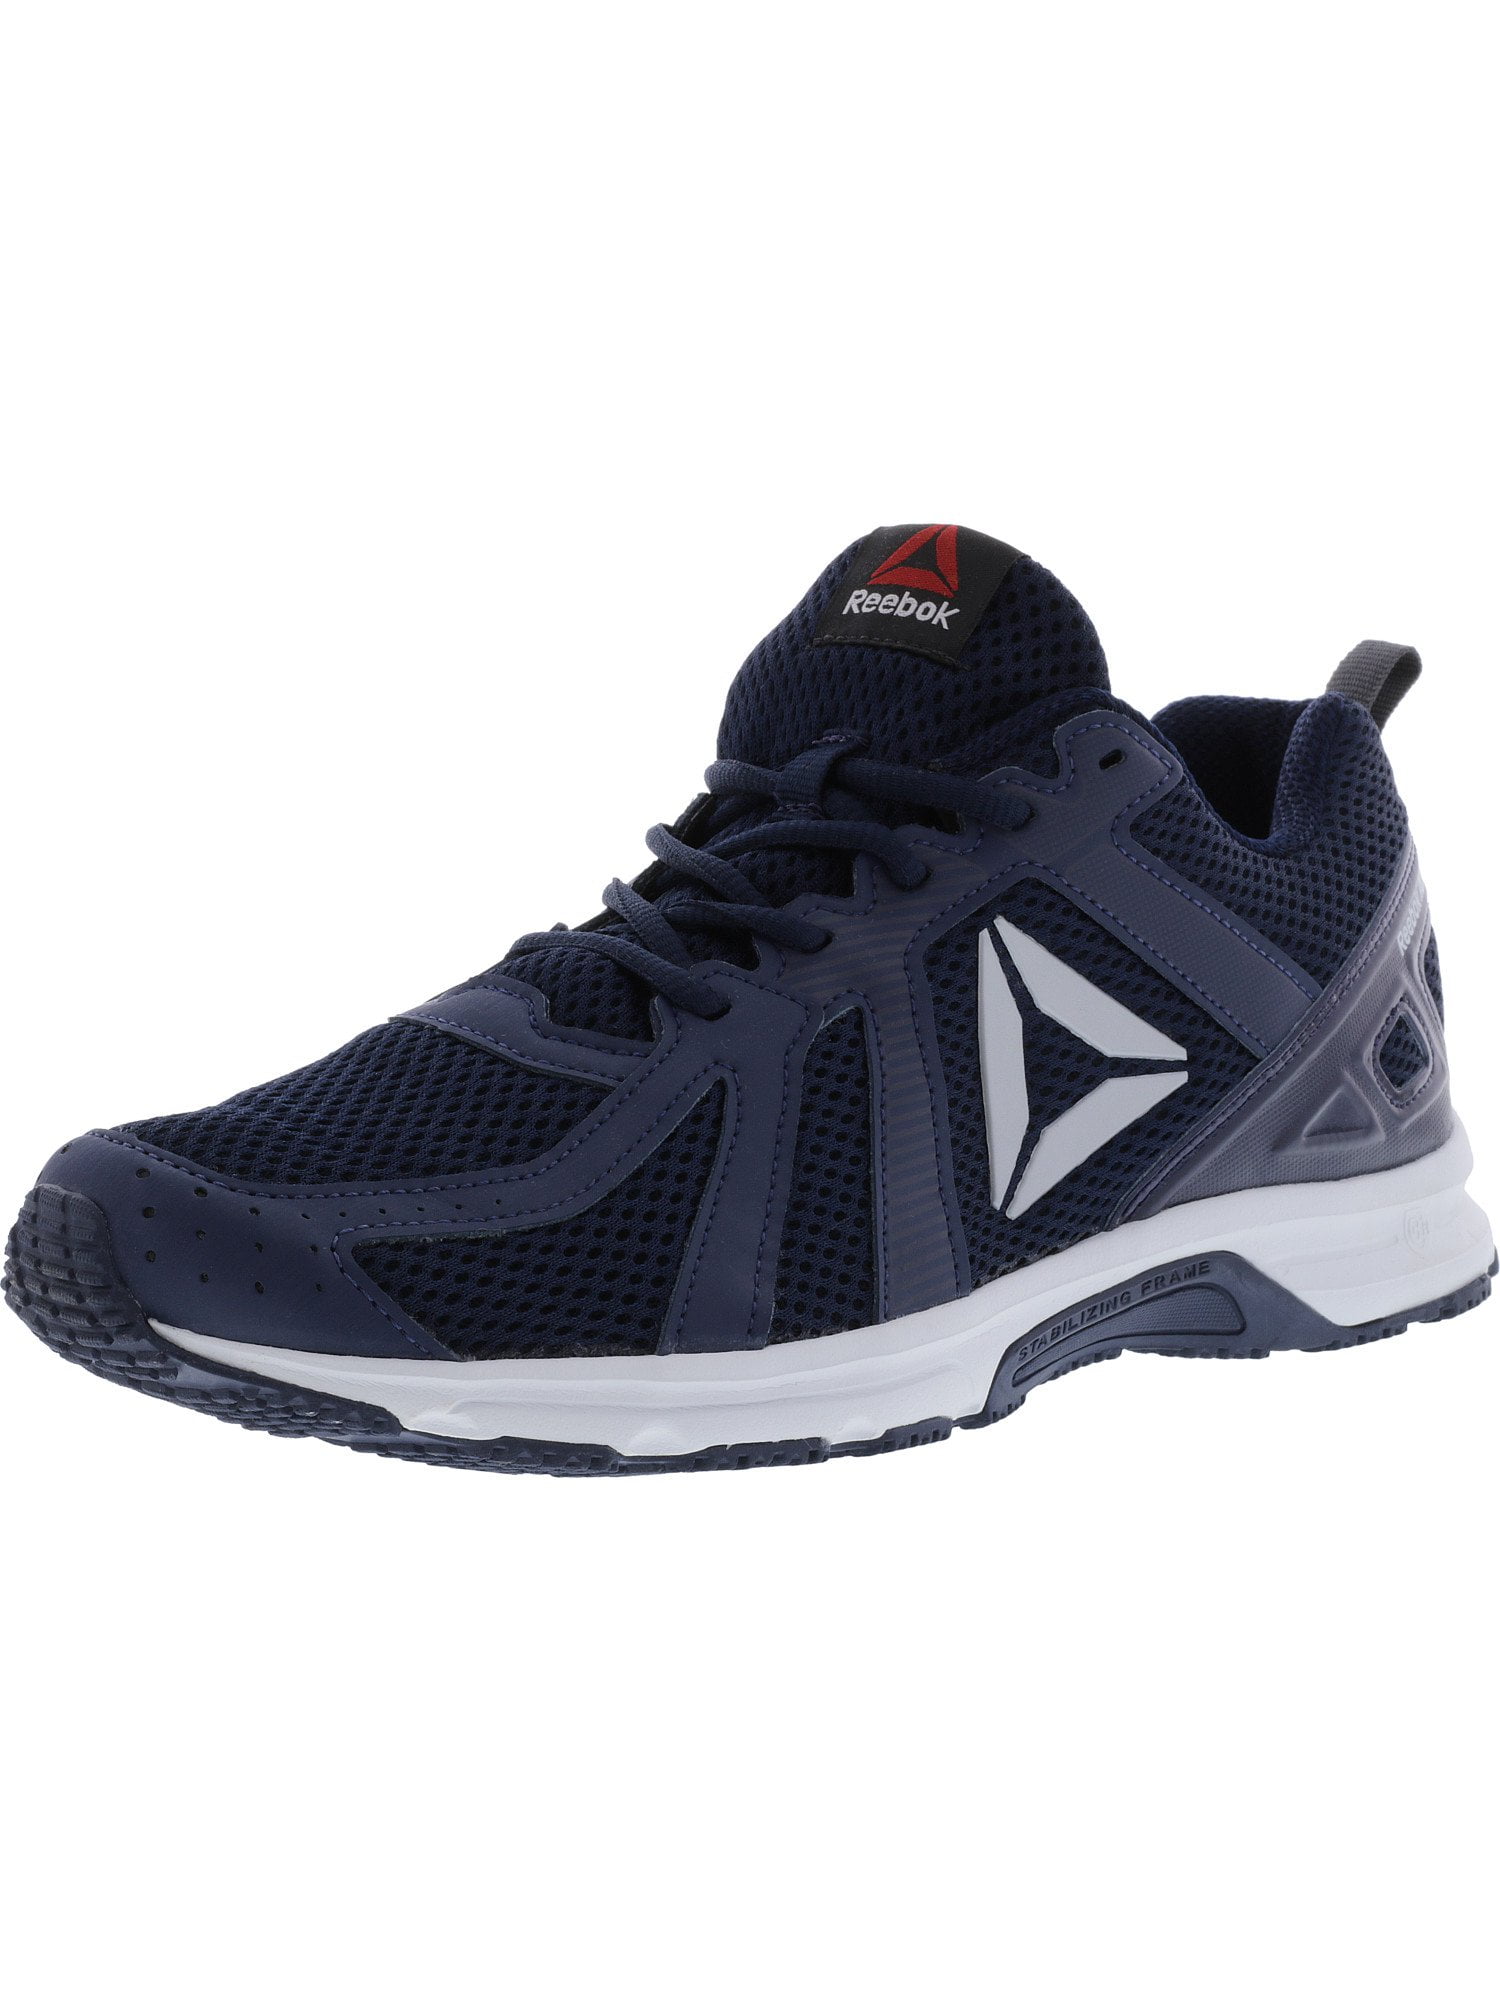 Silver Ankle-High Running Shoe - 9M 